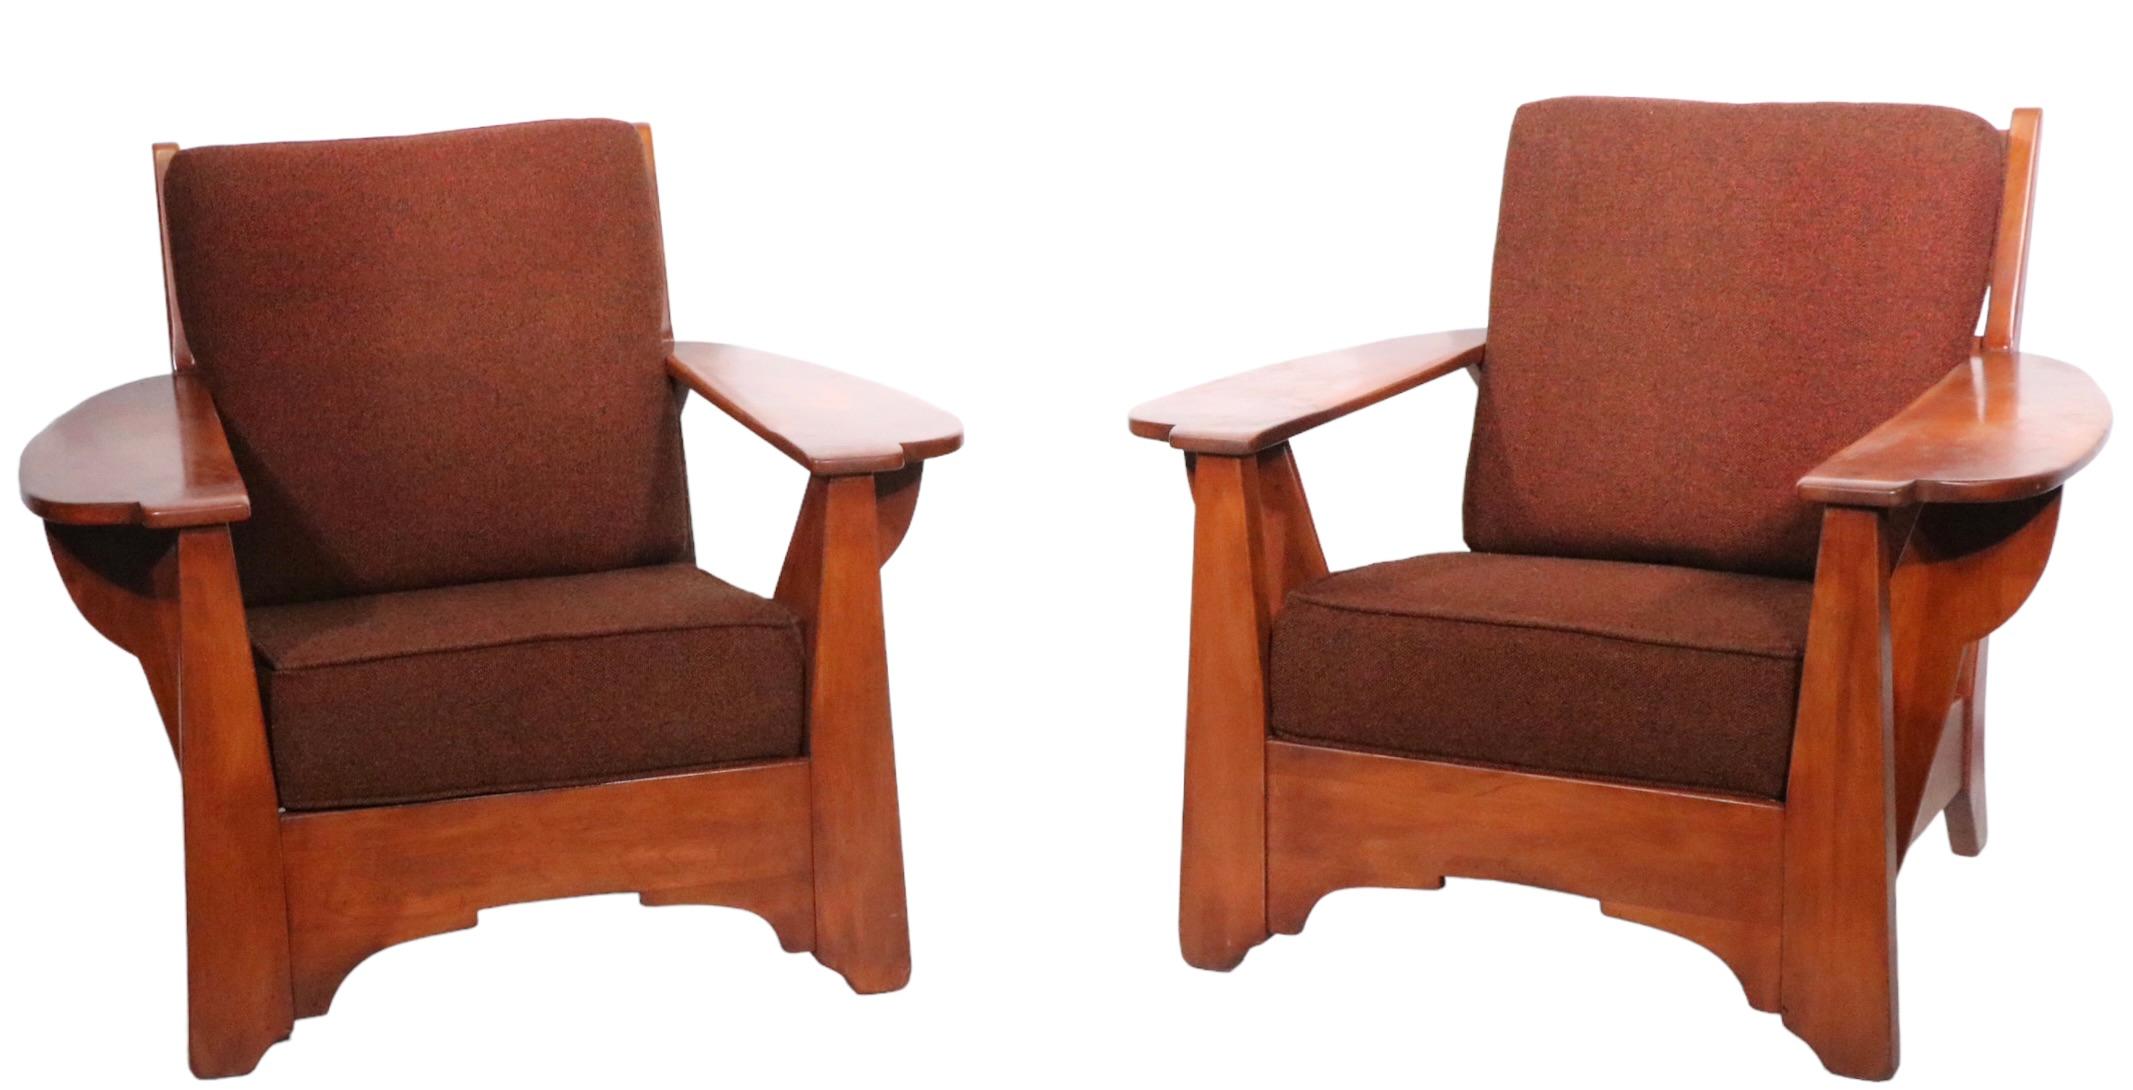 Pr. Paddle Arm Lounge Chairs by Herman de Vries for Cushman Colonial, c 1940-50s 3